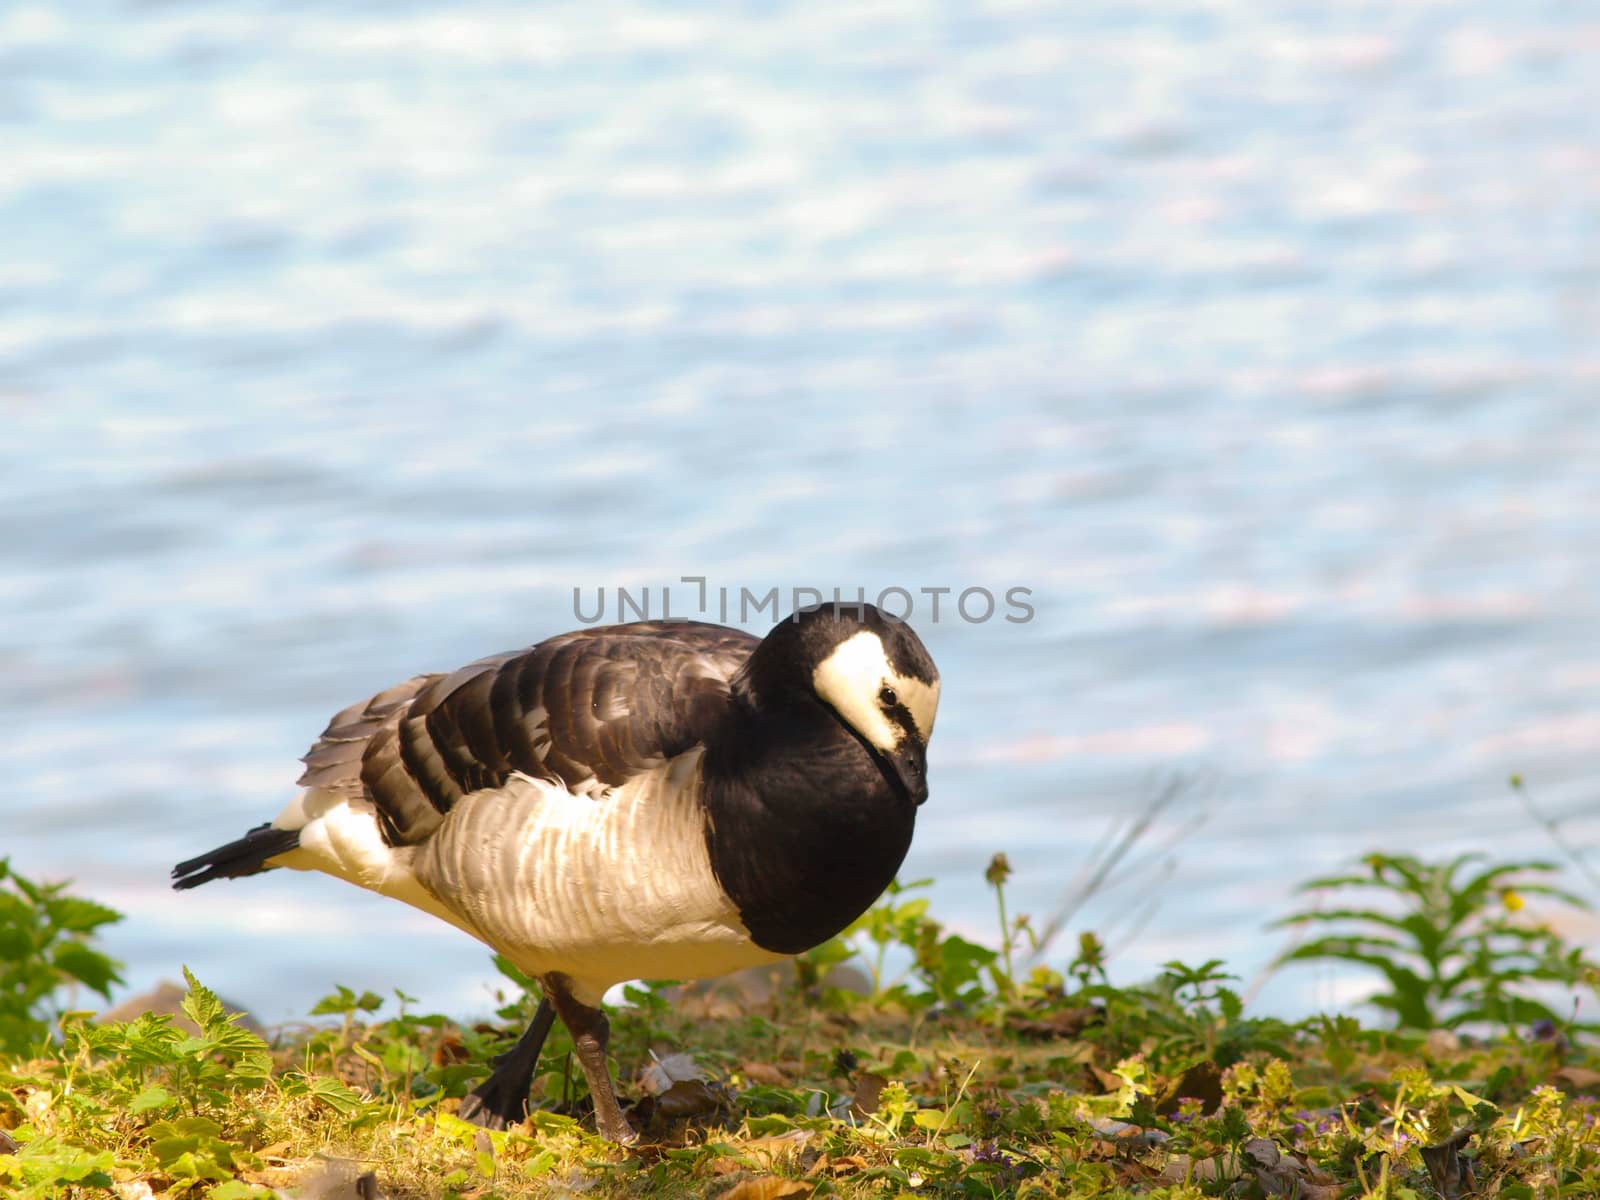 Single barnacle goose, walking in fresh green grass in front of shimmering blue sea